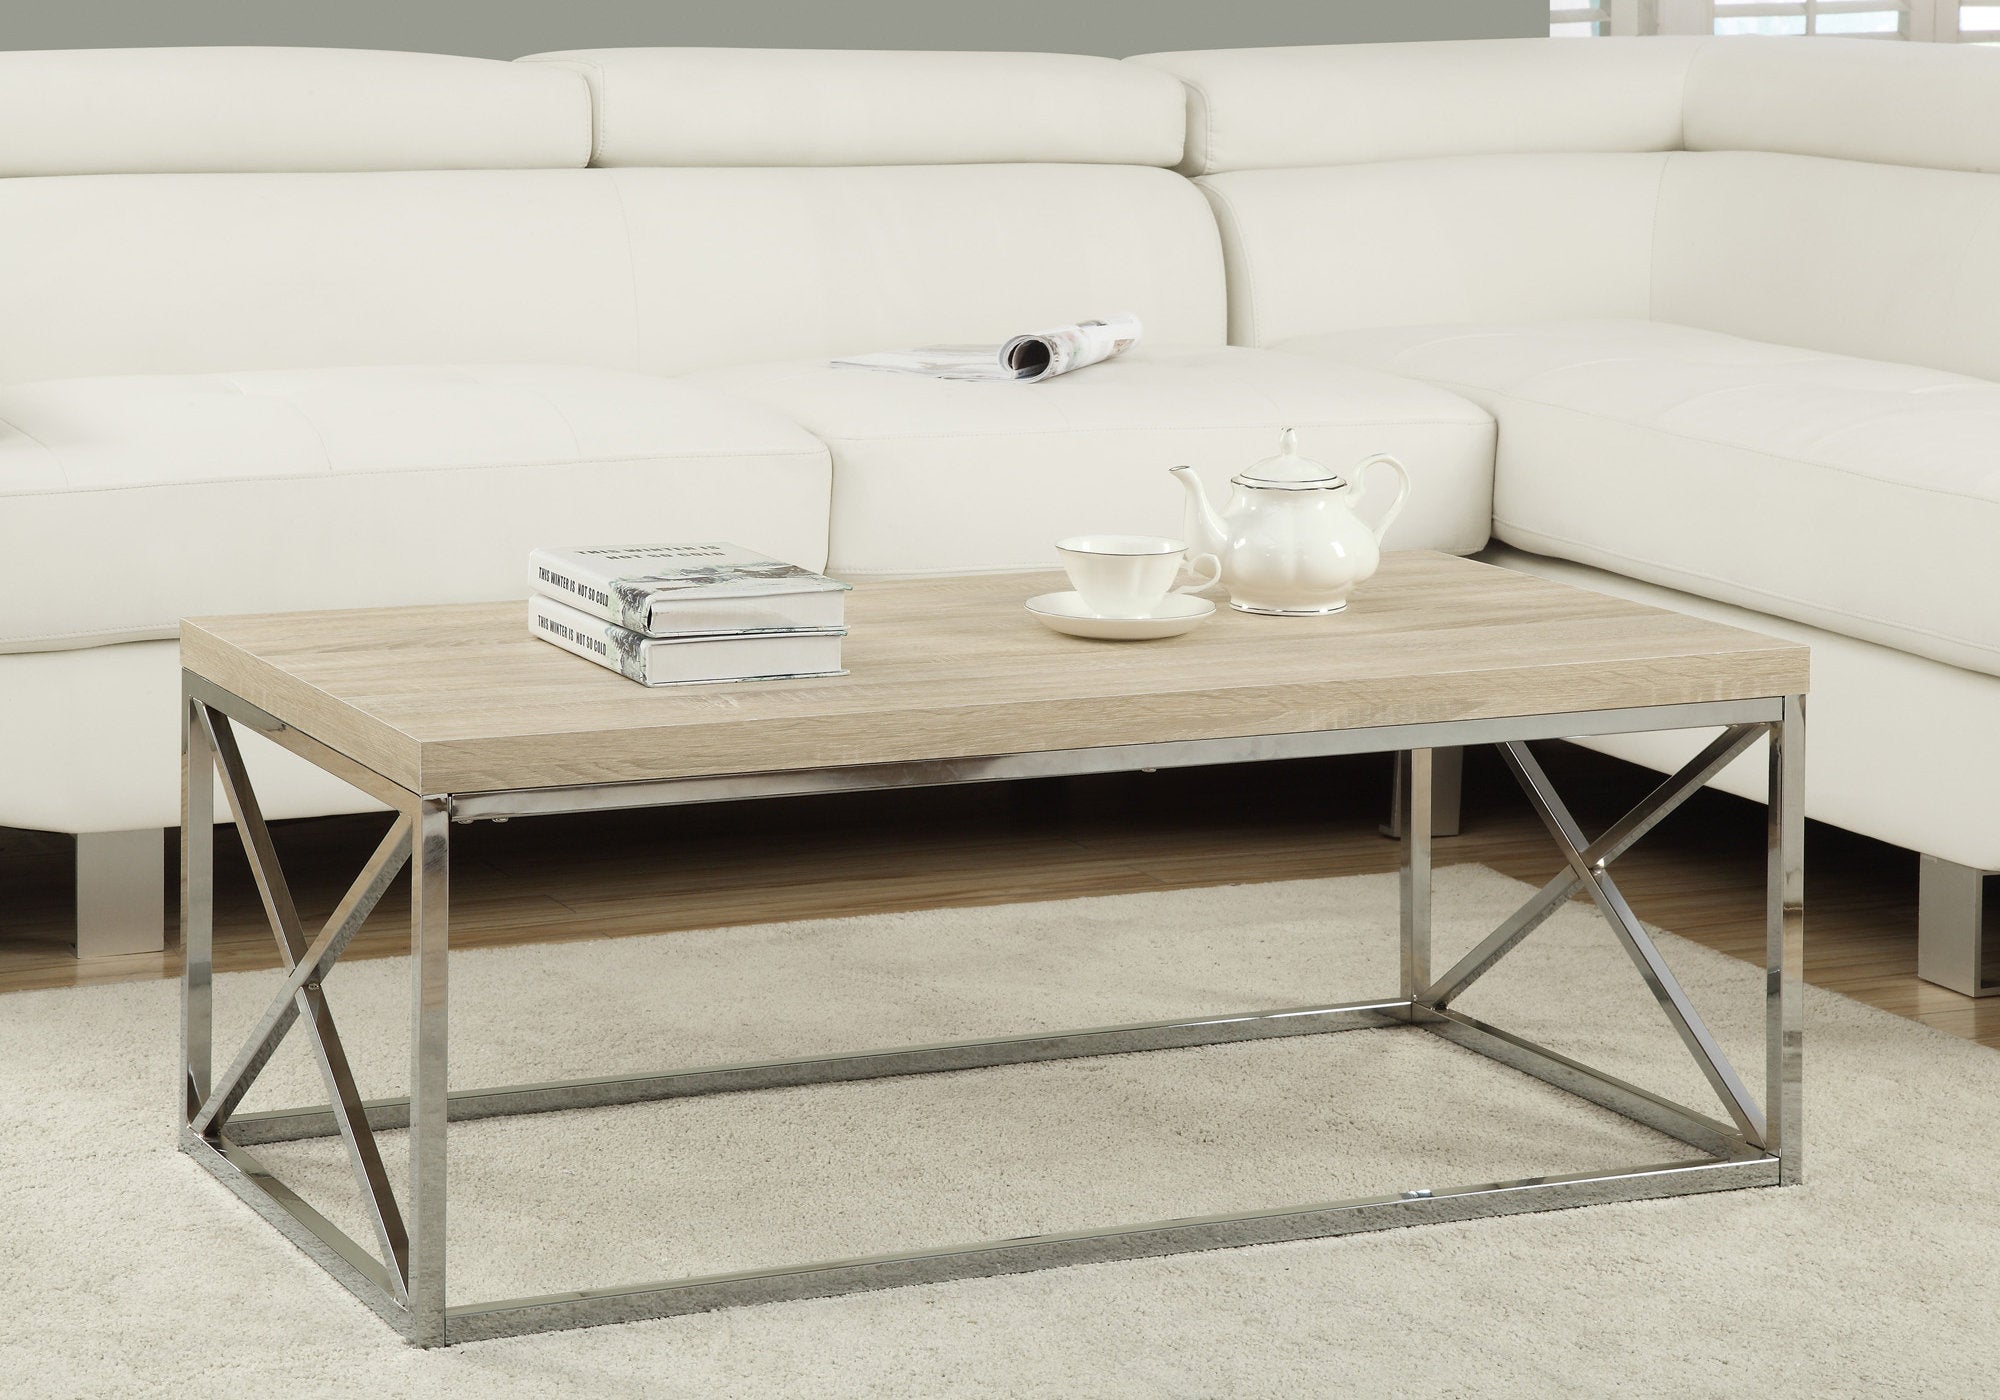 MN-713208    Coffee Table, Accent, Cocktail, Rectangular, Living Room, Metal Frame, Laminate, Natural, Chrome, Contemporary, Modern